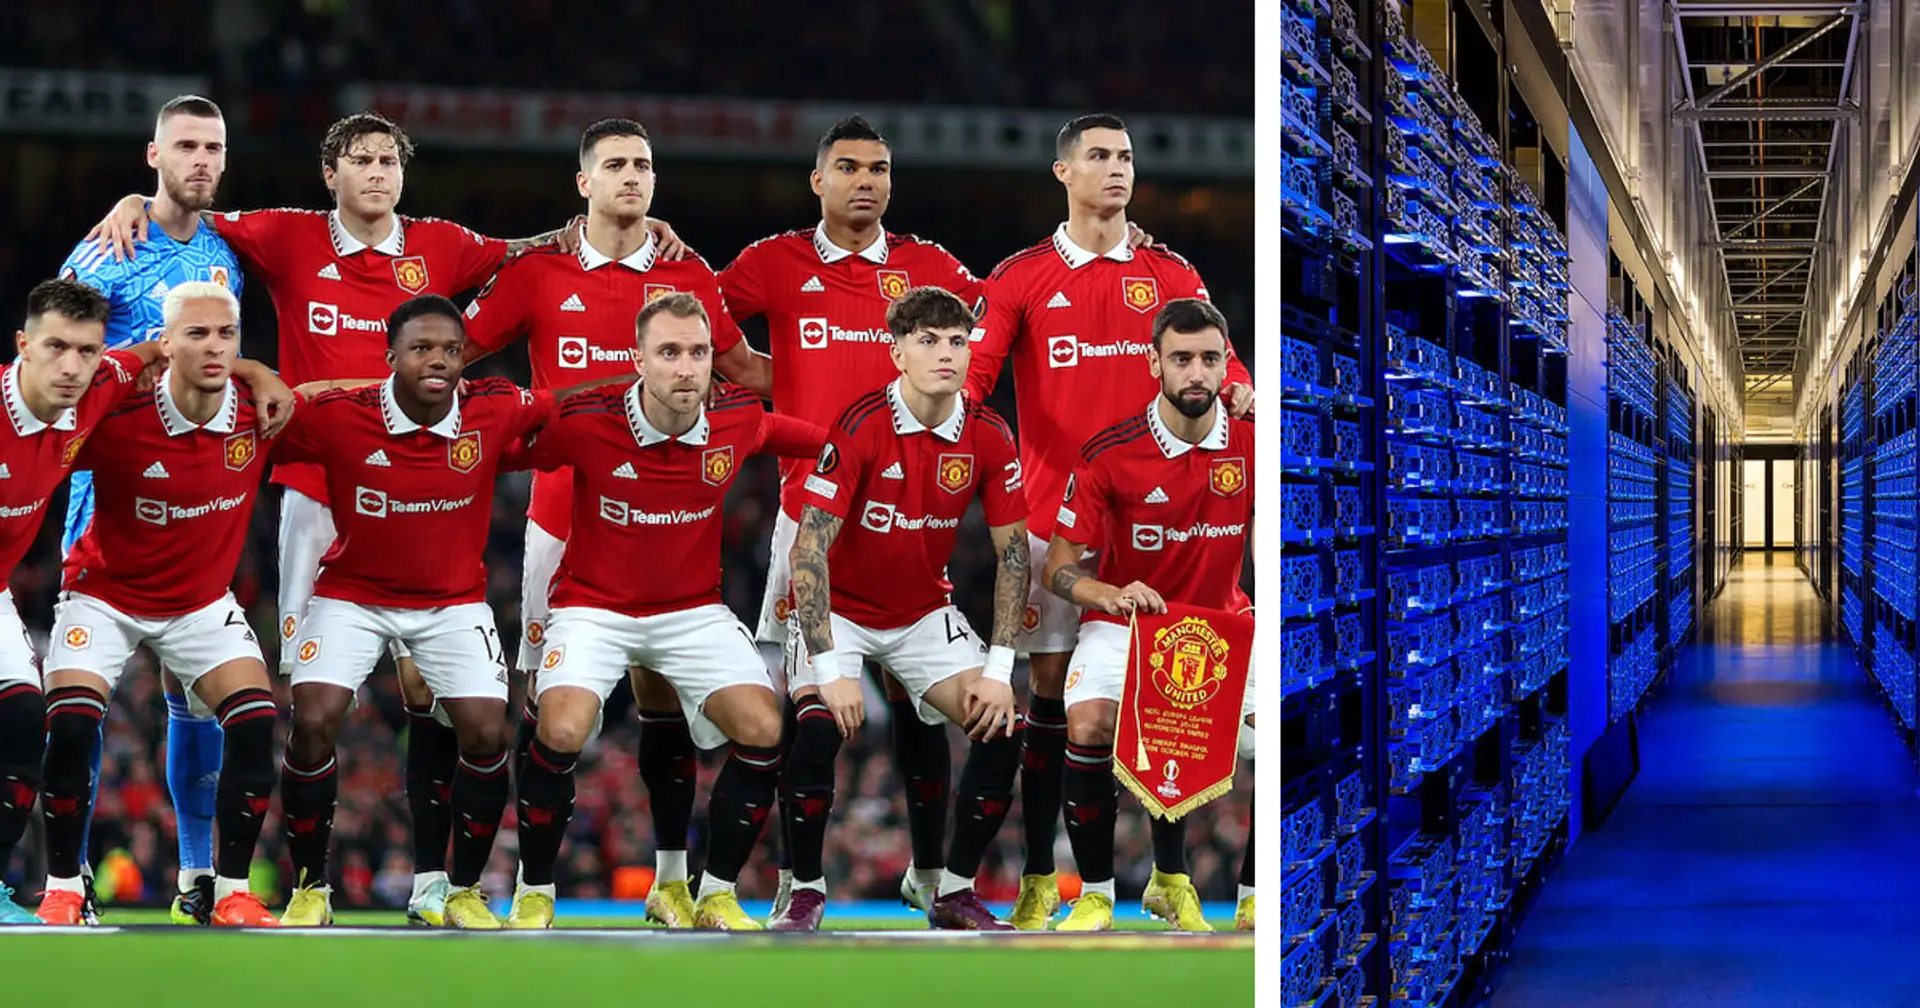 Supercomputer updates Man United's chances of winning Europa League after qualifying for knockout rounds